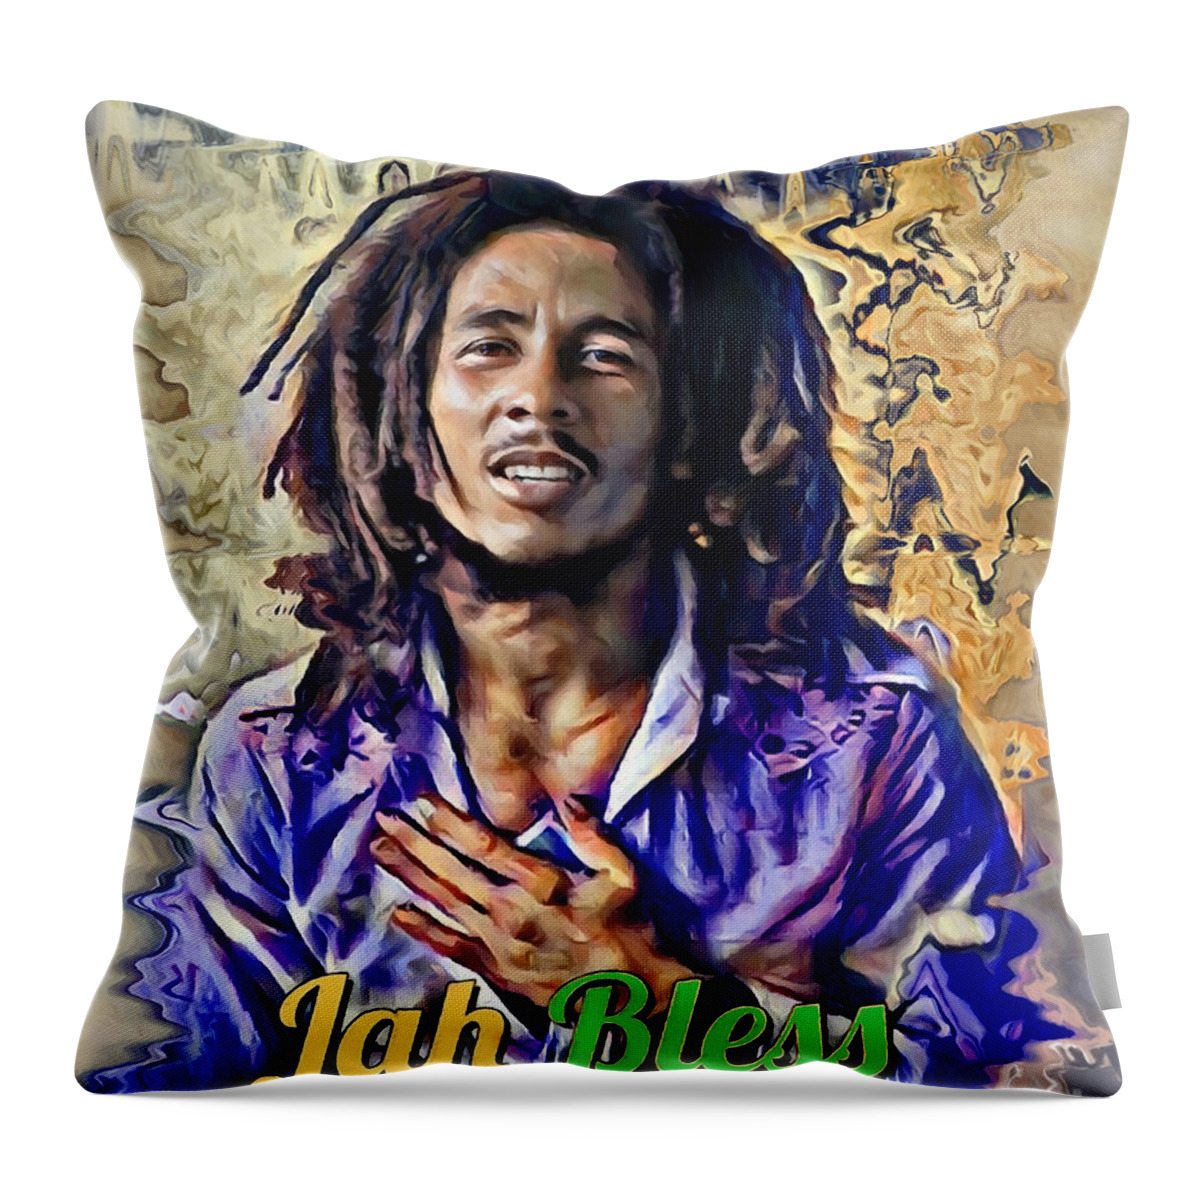 Jah Bless Throw Pillow featuring the mixed media Jah Bless by Carl Gouveia